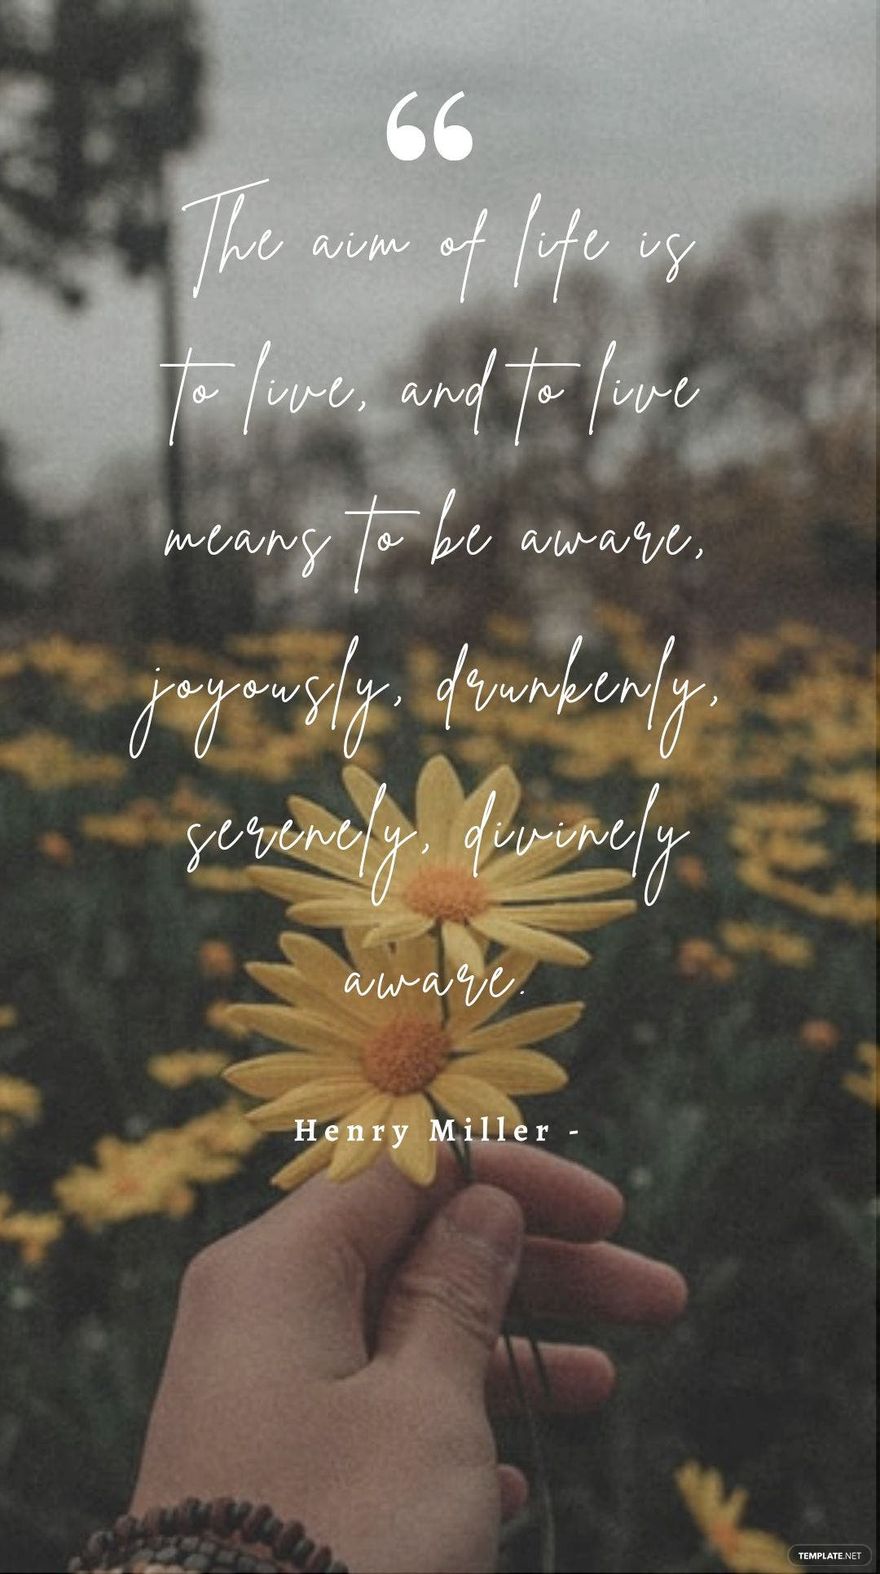 Henry Miller - The aim of life is to live, and to live means to be aware, joyously, drunkenly, serenely, divinely aware.